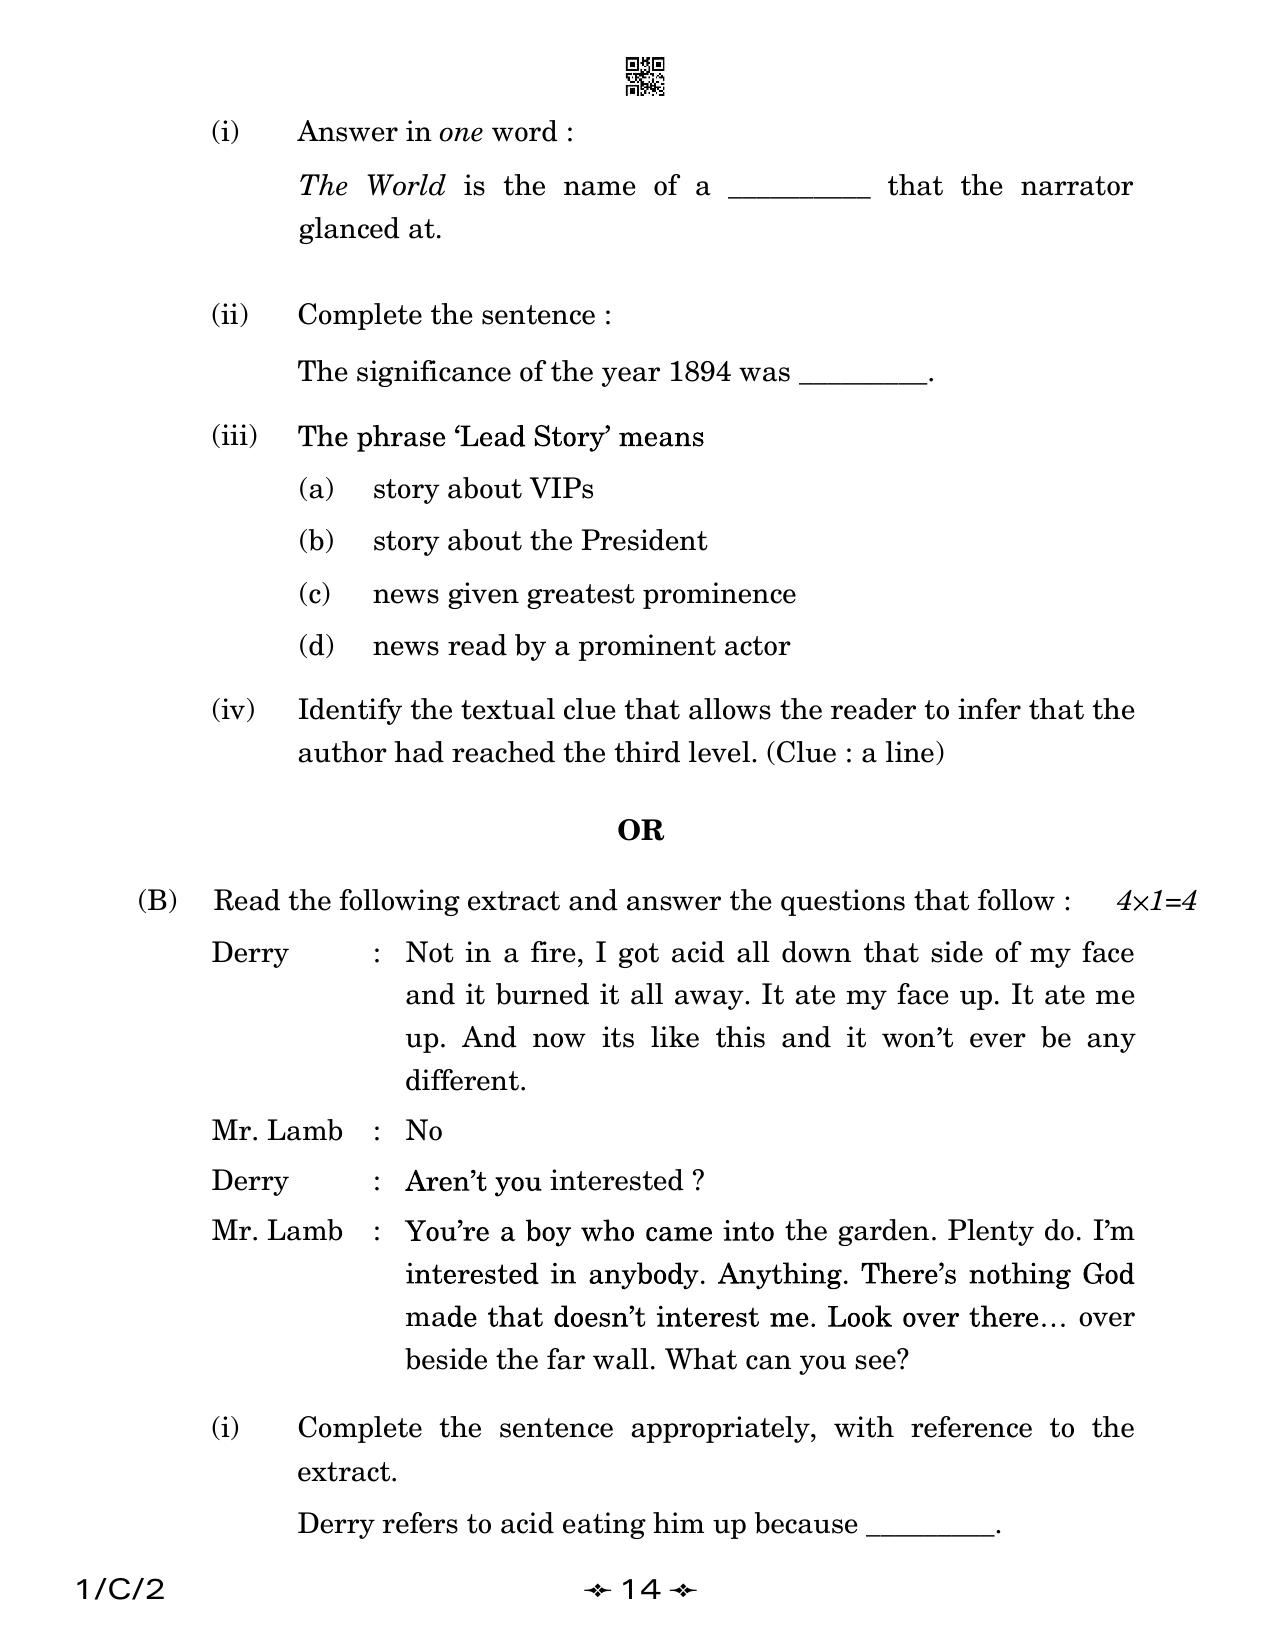 CBSE Class 12 1-2 English Core 2023 (Compartment) Question Paper - Page 14